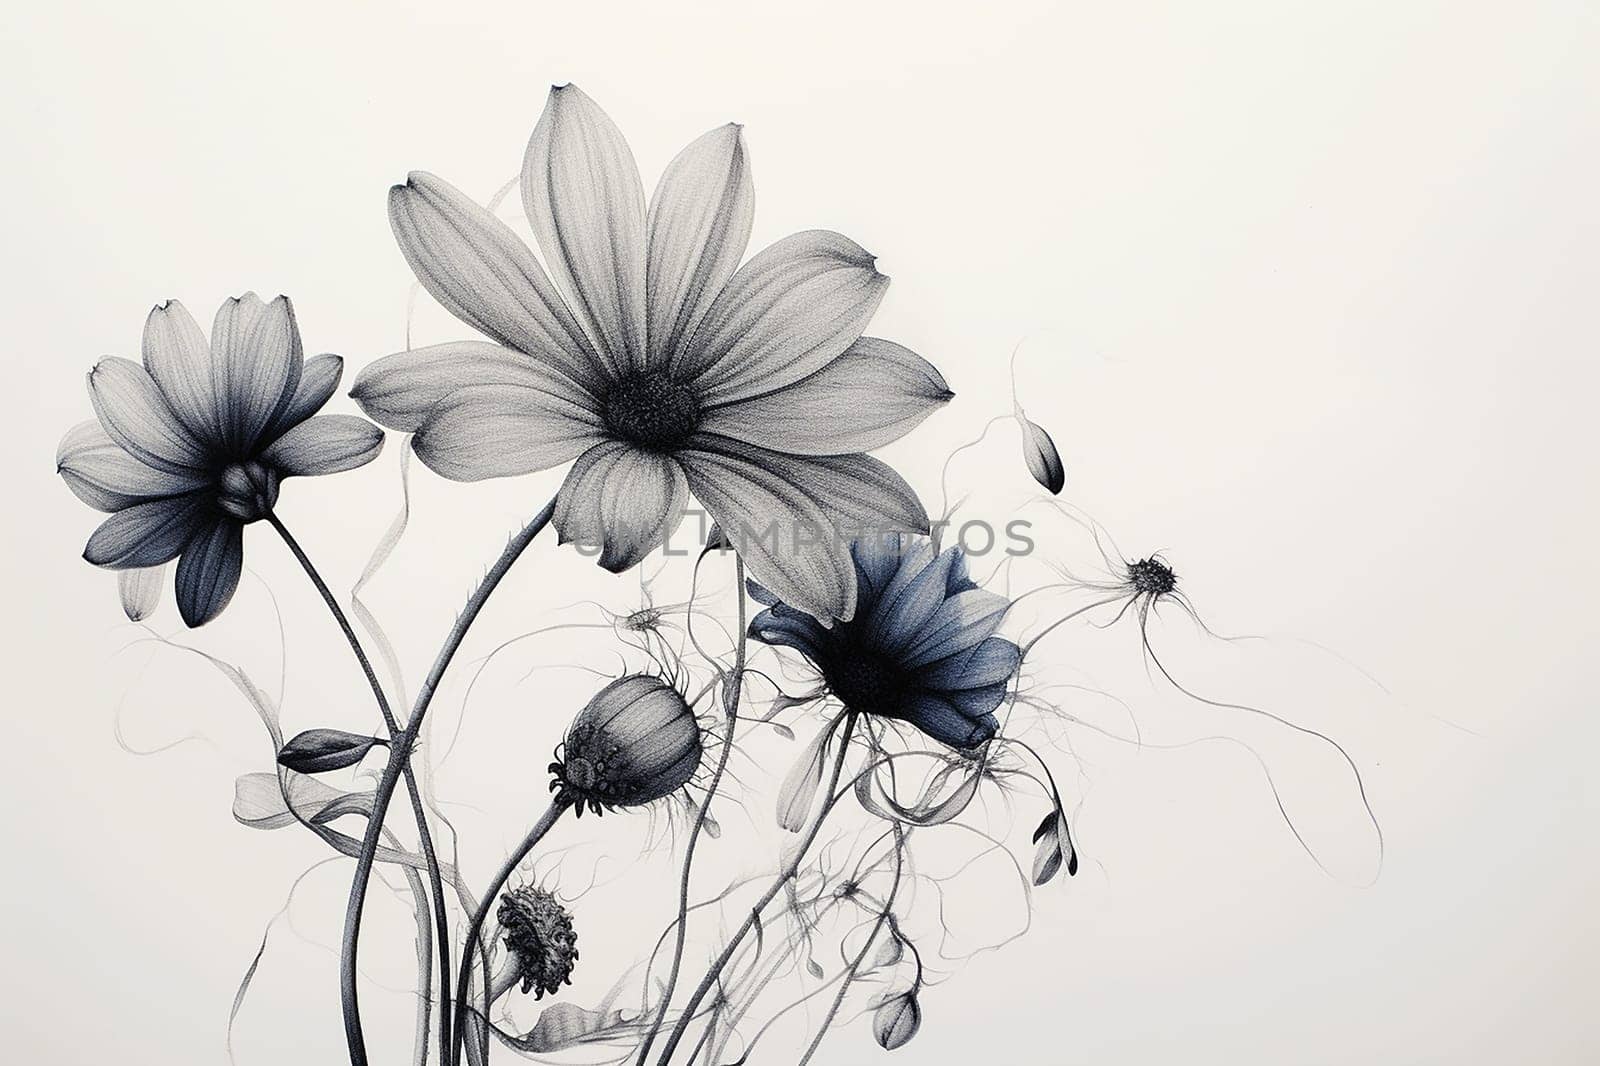 Elegant monochrome illustration of translucent flowers with delicate details. by Hype2art